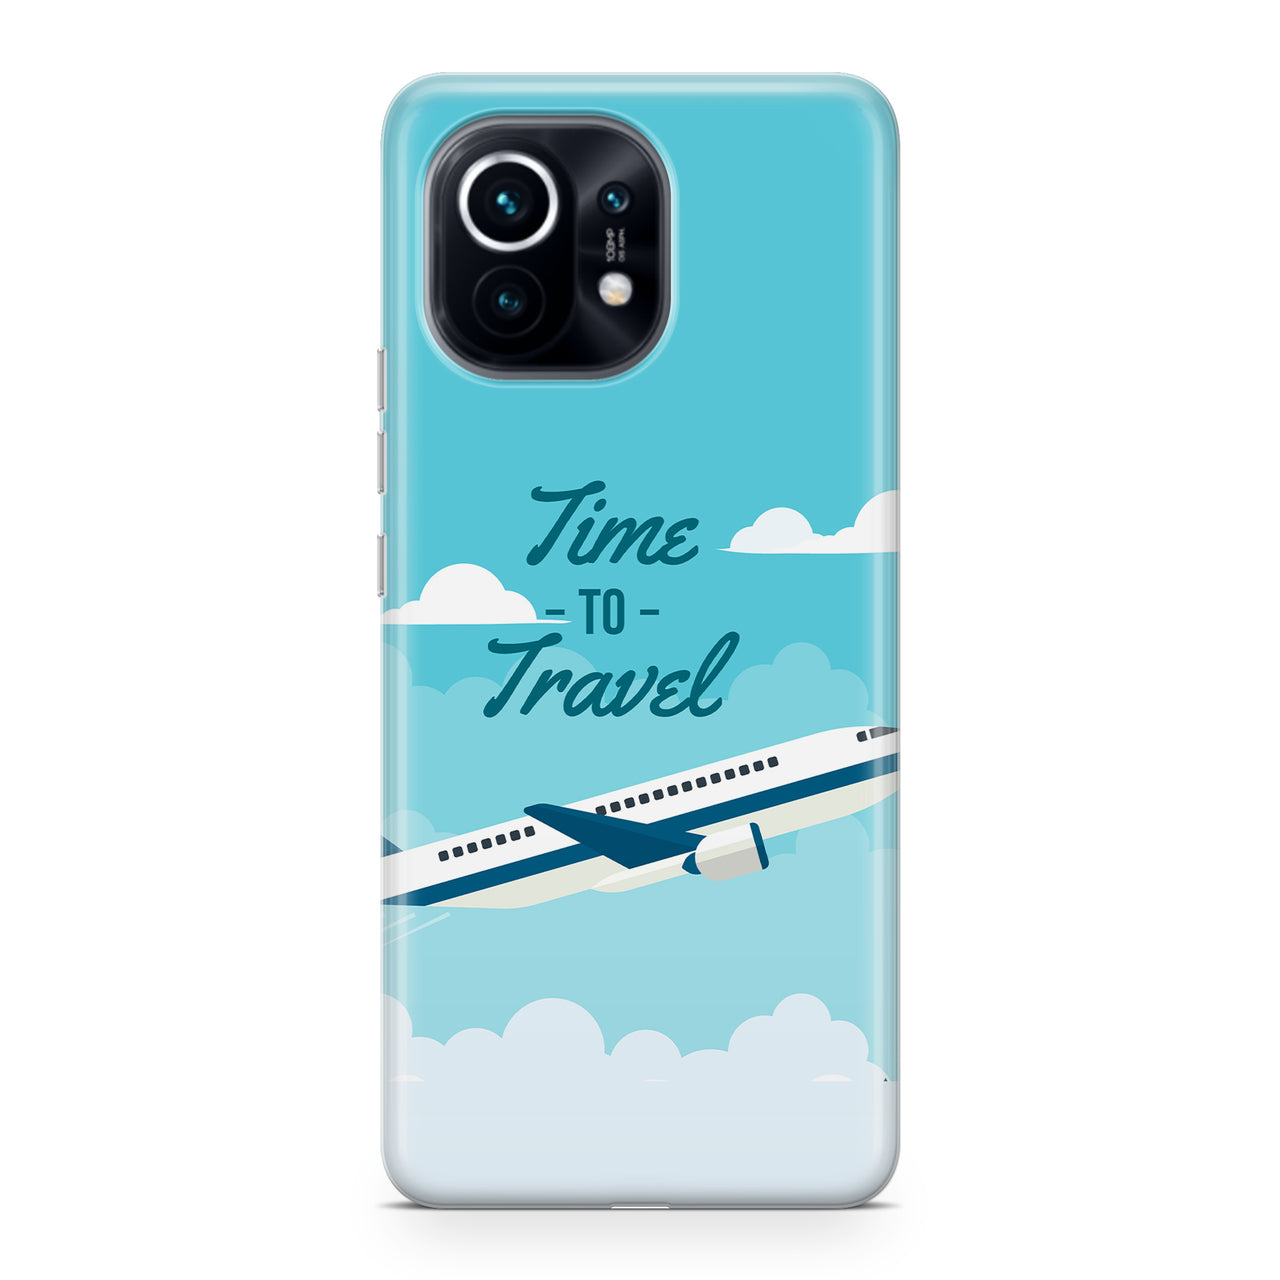 Time to Travel Designed Xiaomi Cases